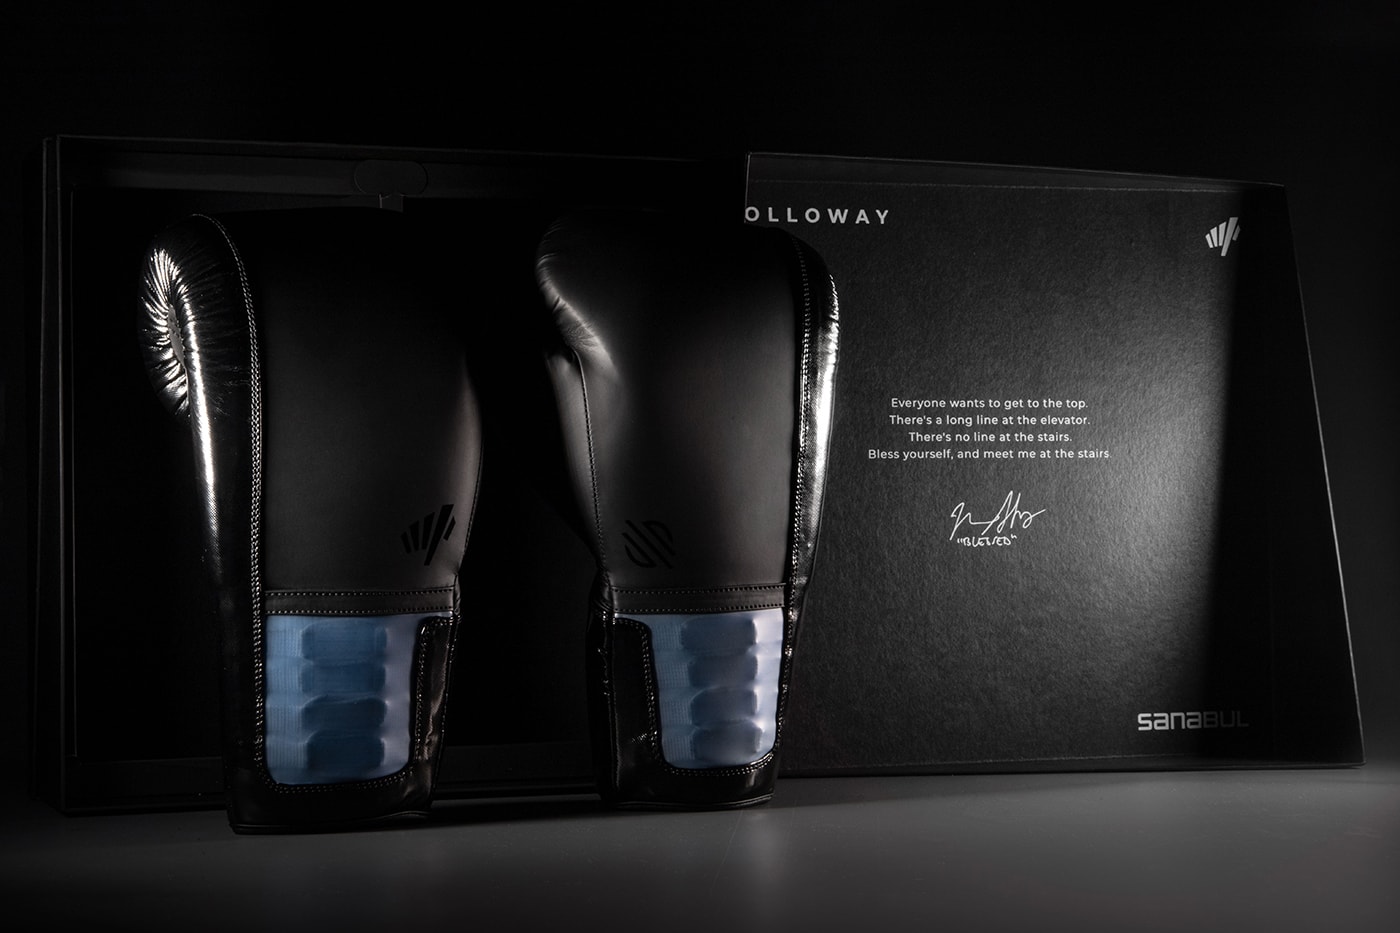 Max Holloway Sanabul Holloway 1 Gloves Release Info Date Buy Price MMA UFC